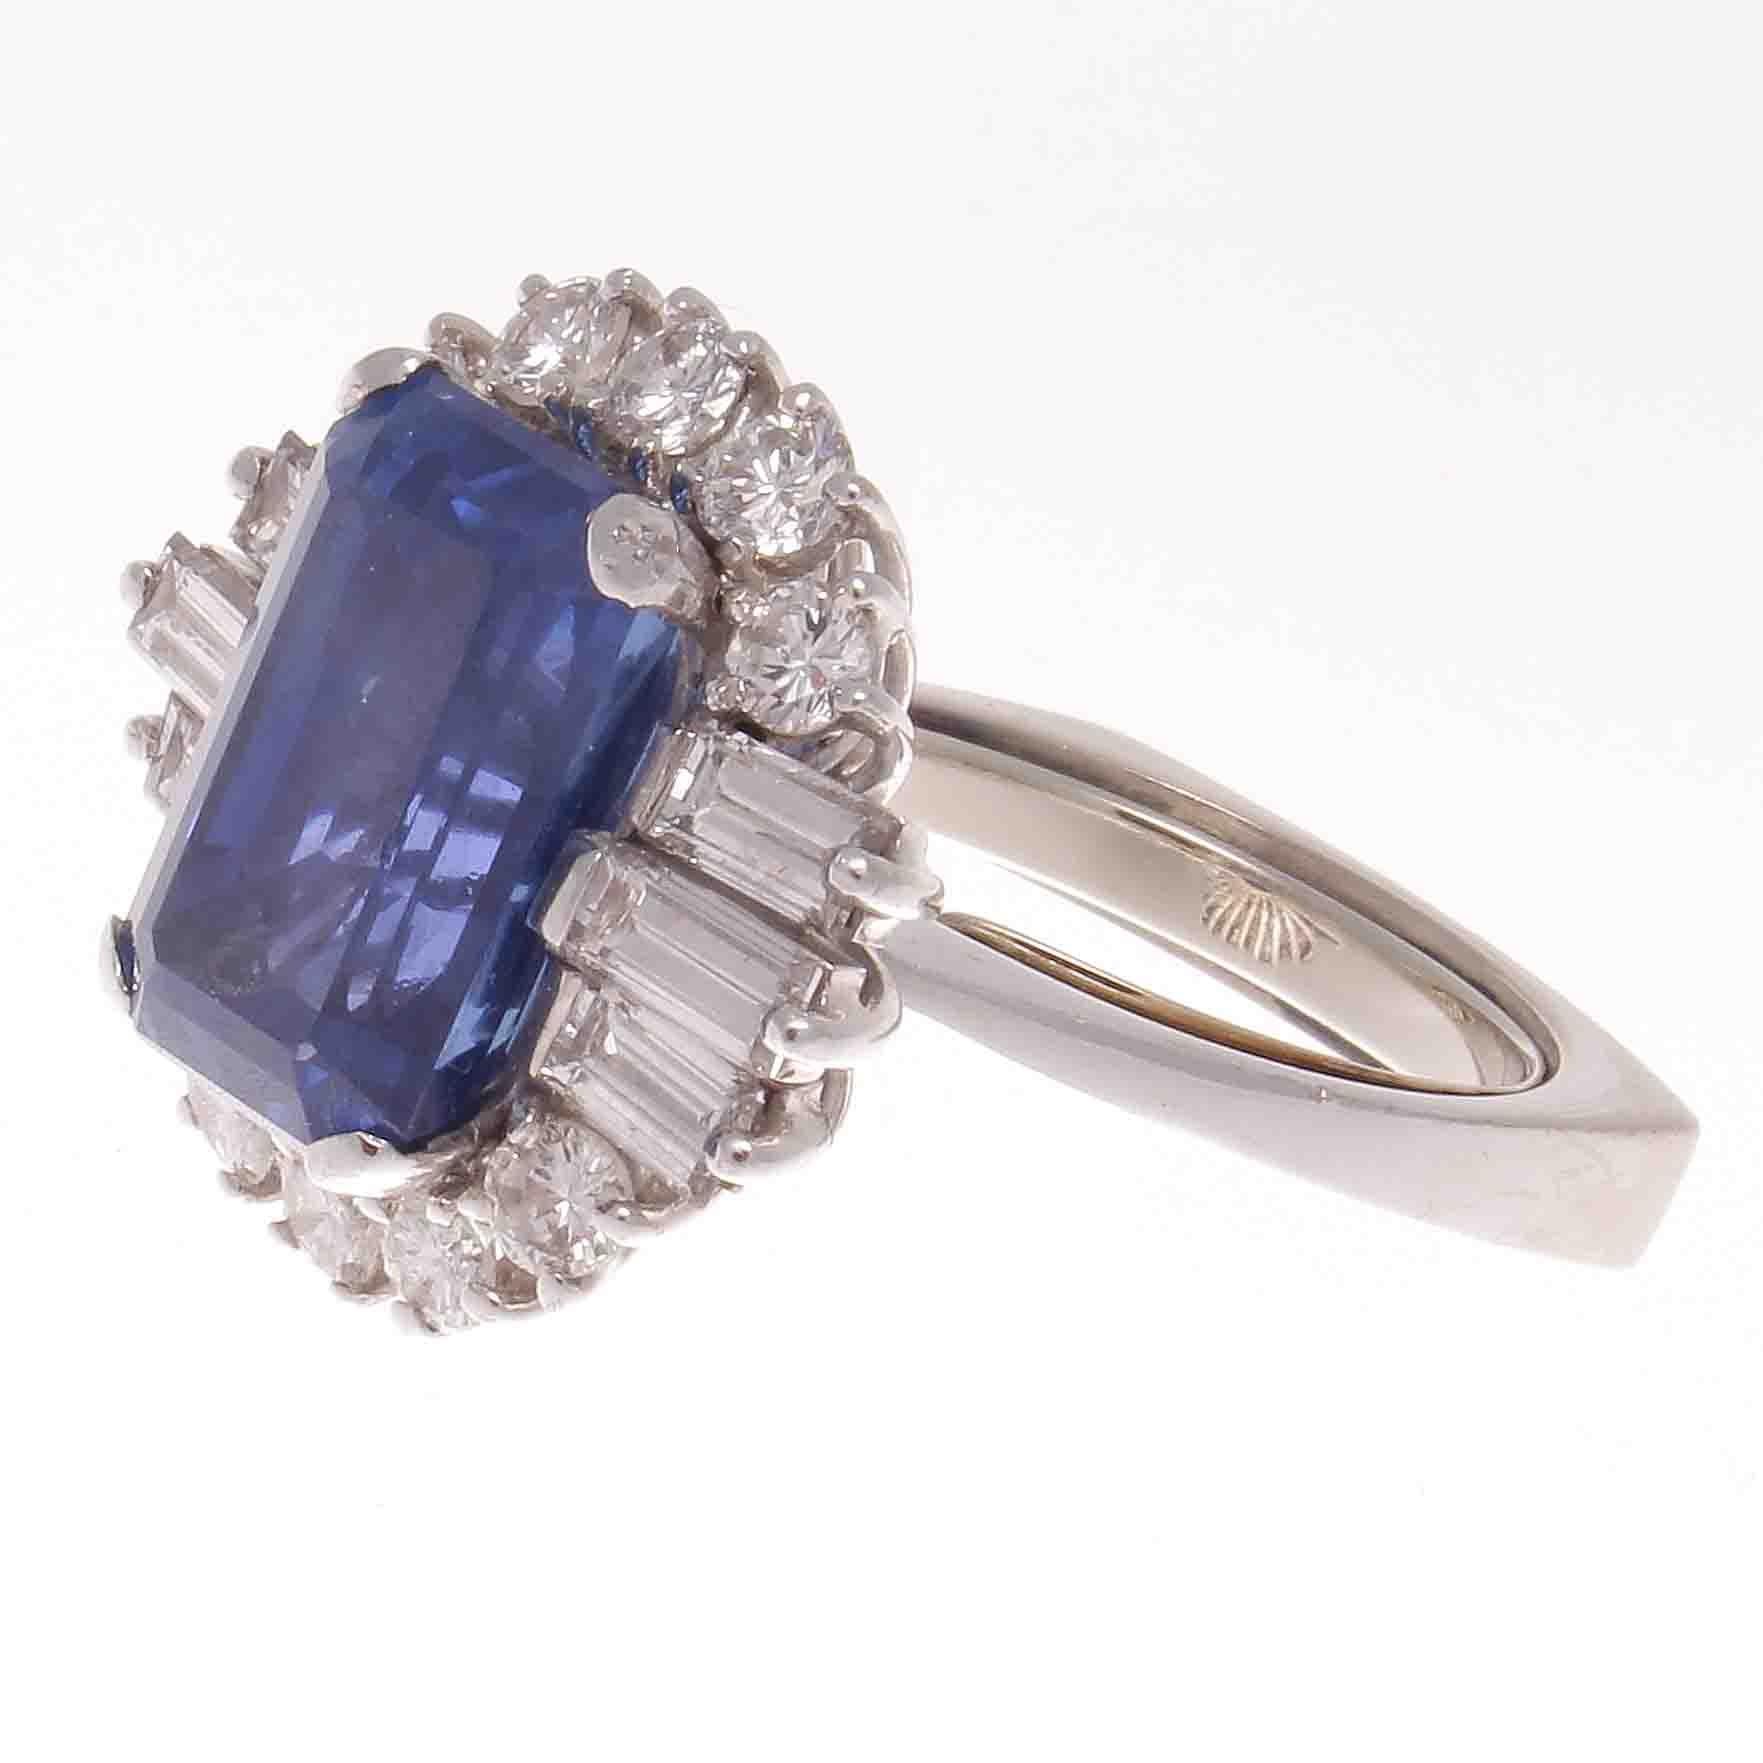 Sapphire Comes from the Latin word 